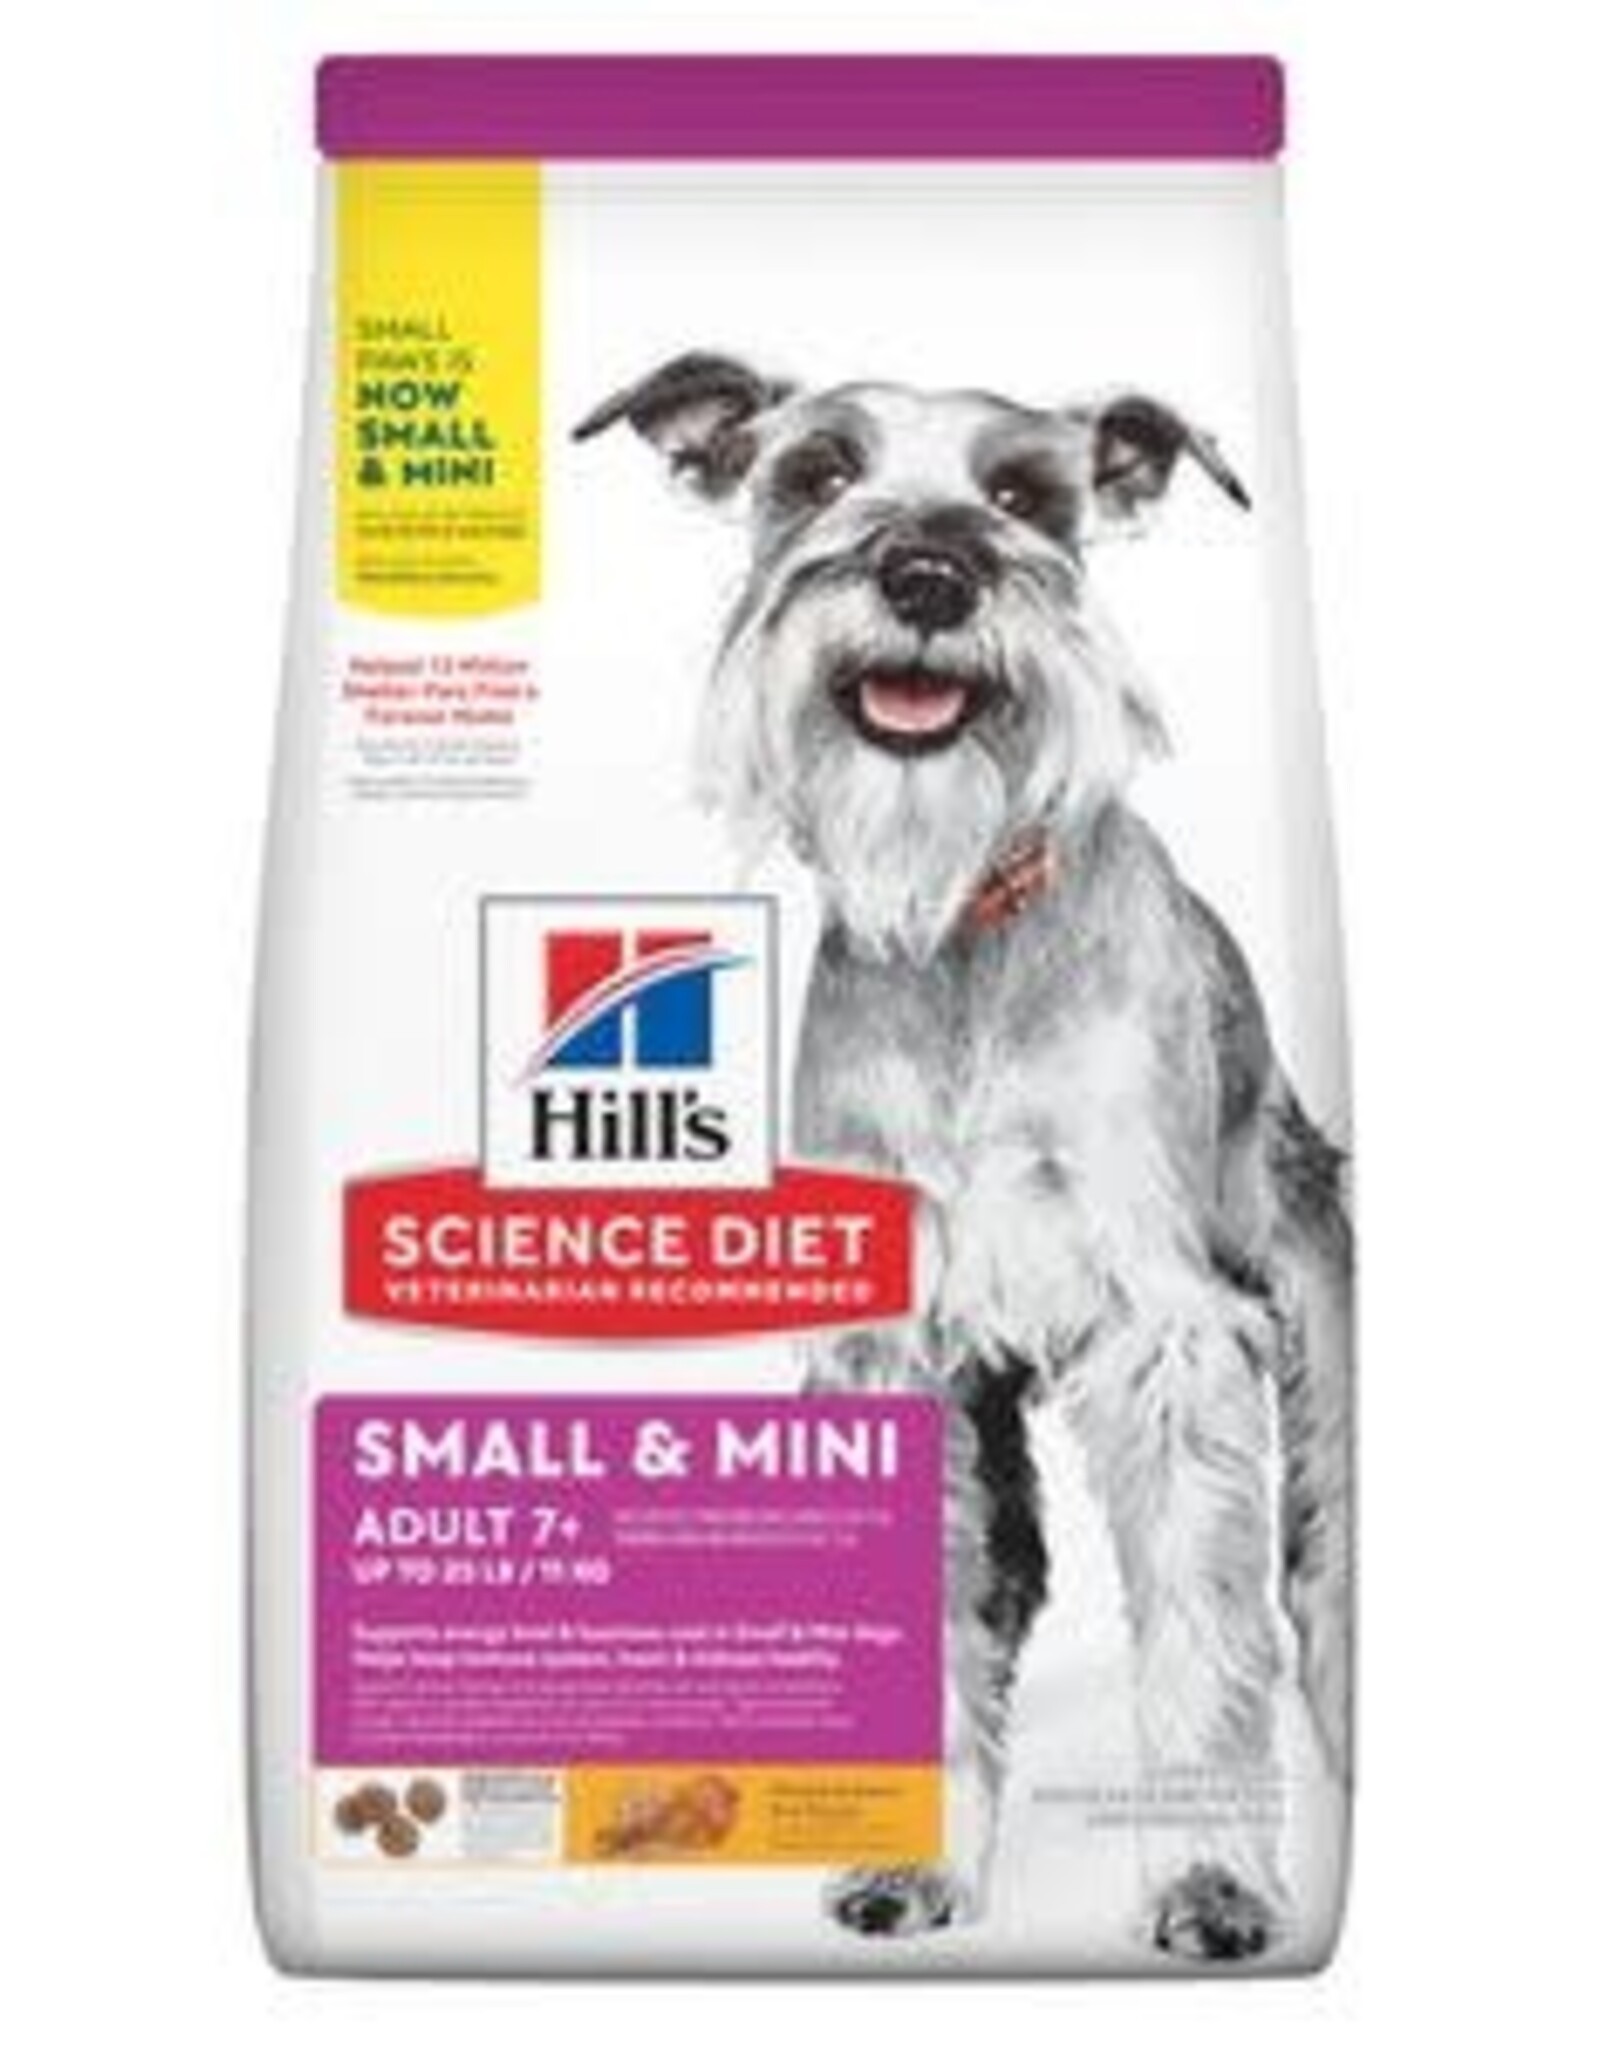 SCIENCE DIET HILL'S SCIENCE DIET CANINE ADULT SMALL PAWS MATURE 7+ 4.5LBS